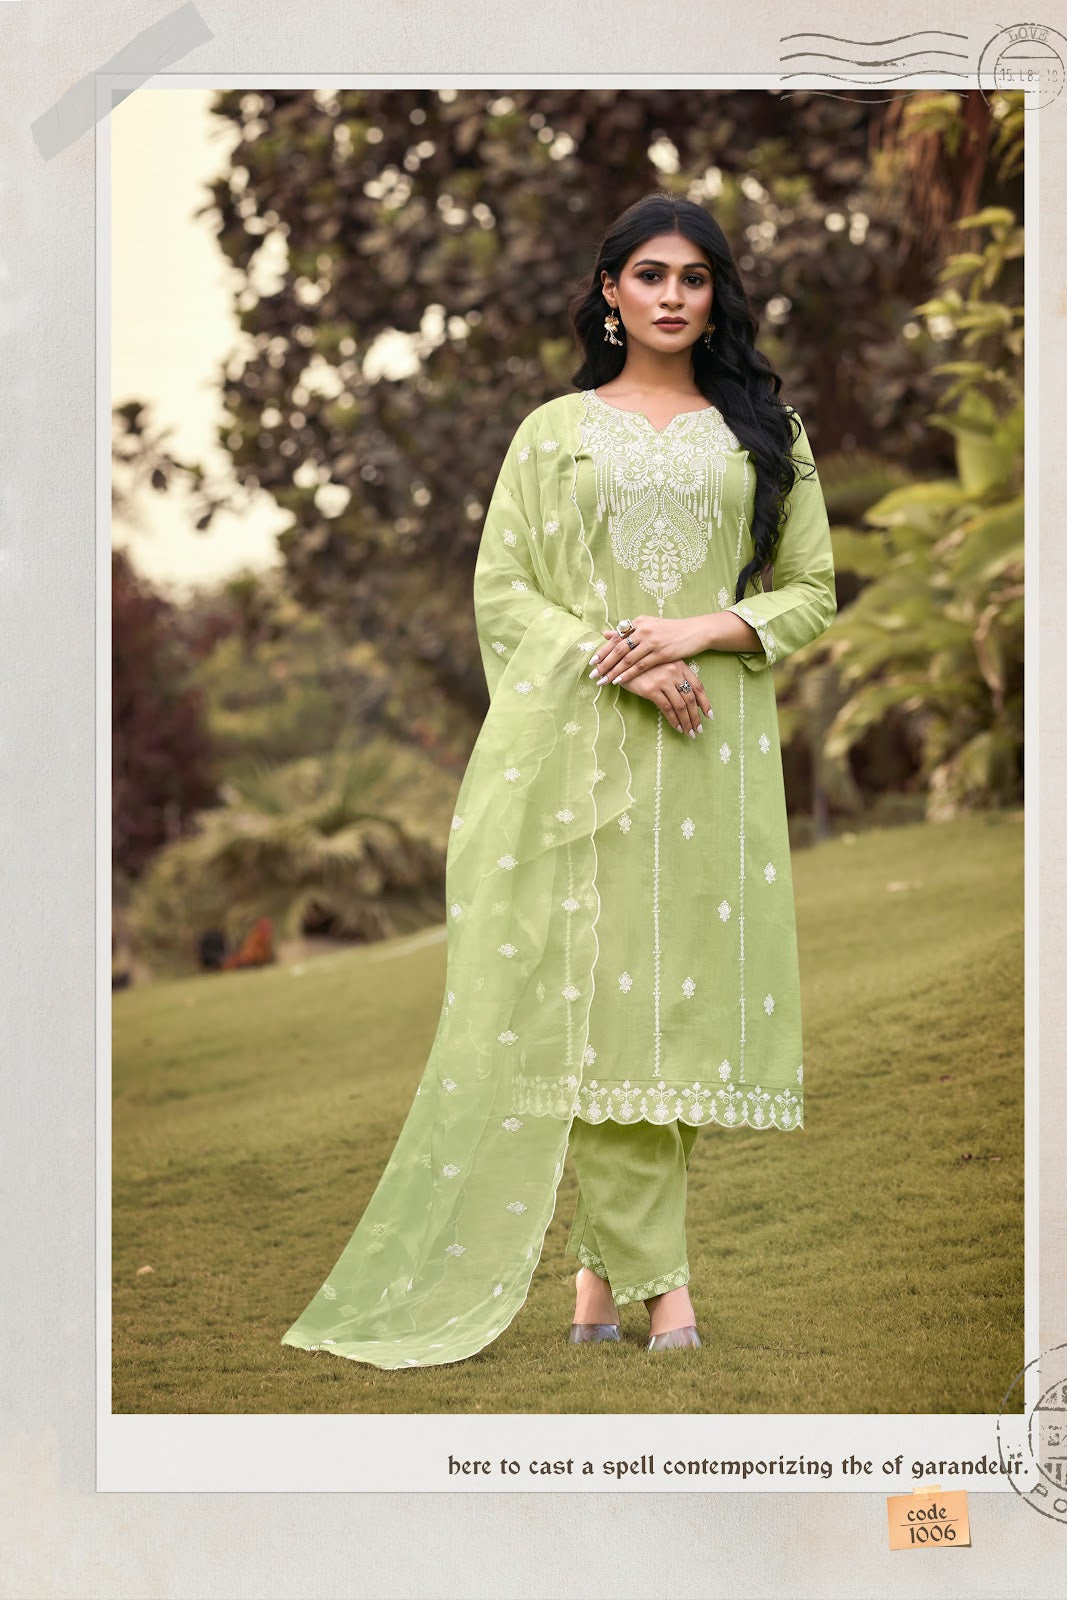 Gulabi Vol 2 Ossm Pure Cotton Readymade Pant Style Suits